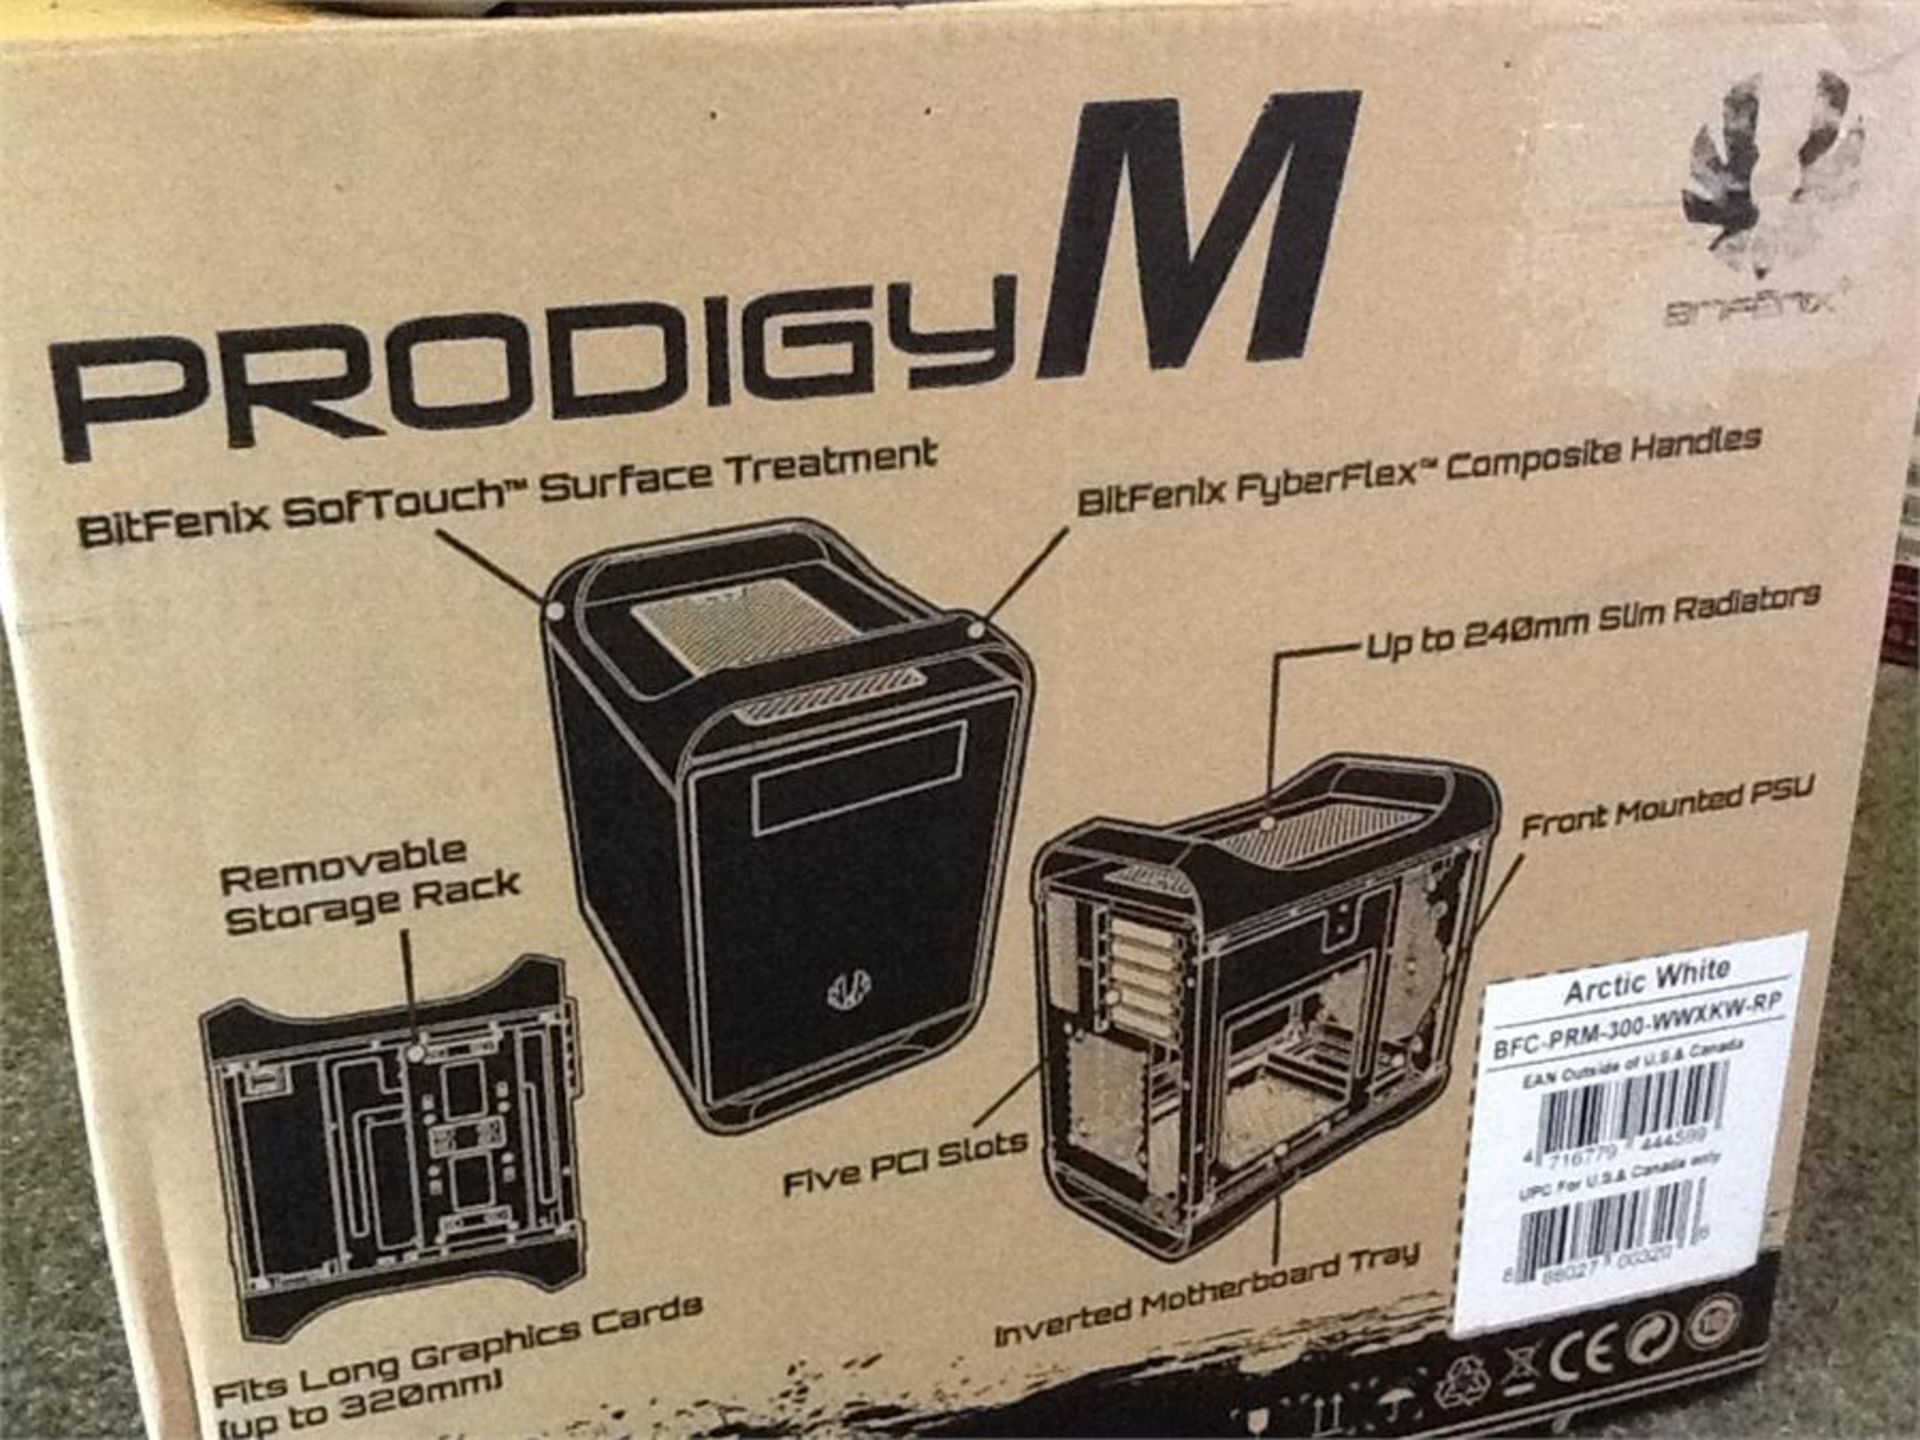 Prodigy M computer case, boxed - Image 8 of 10